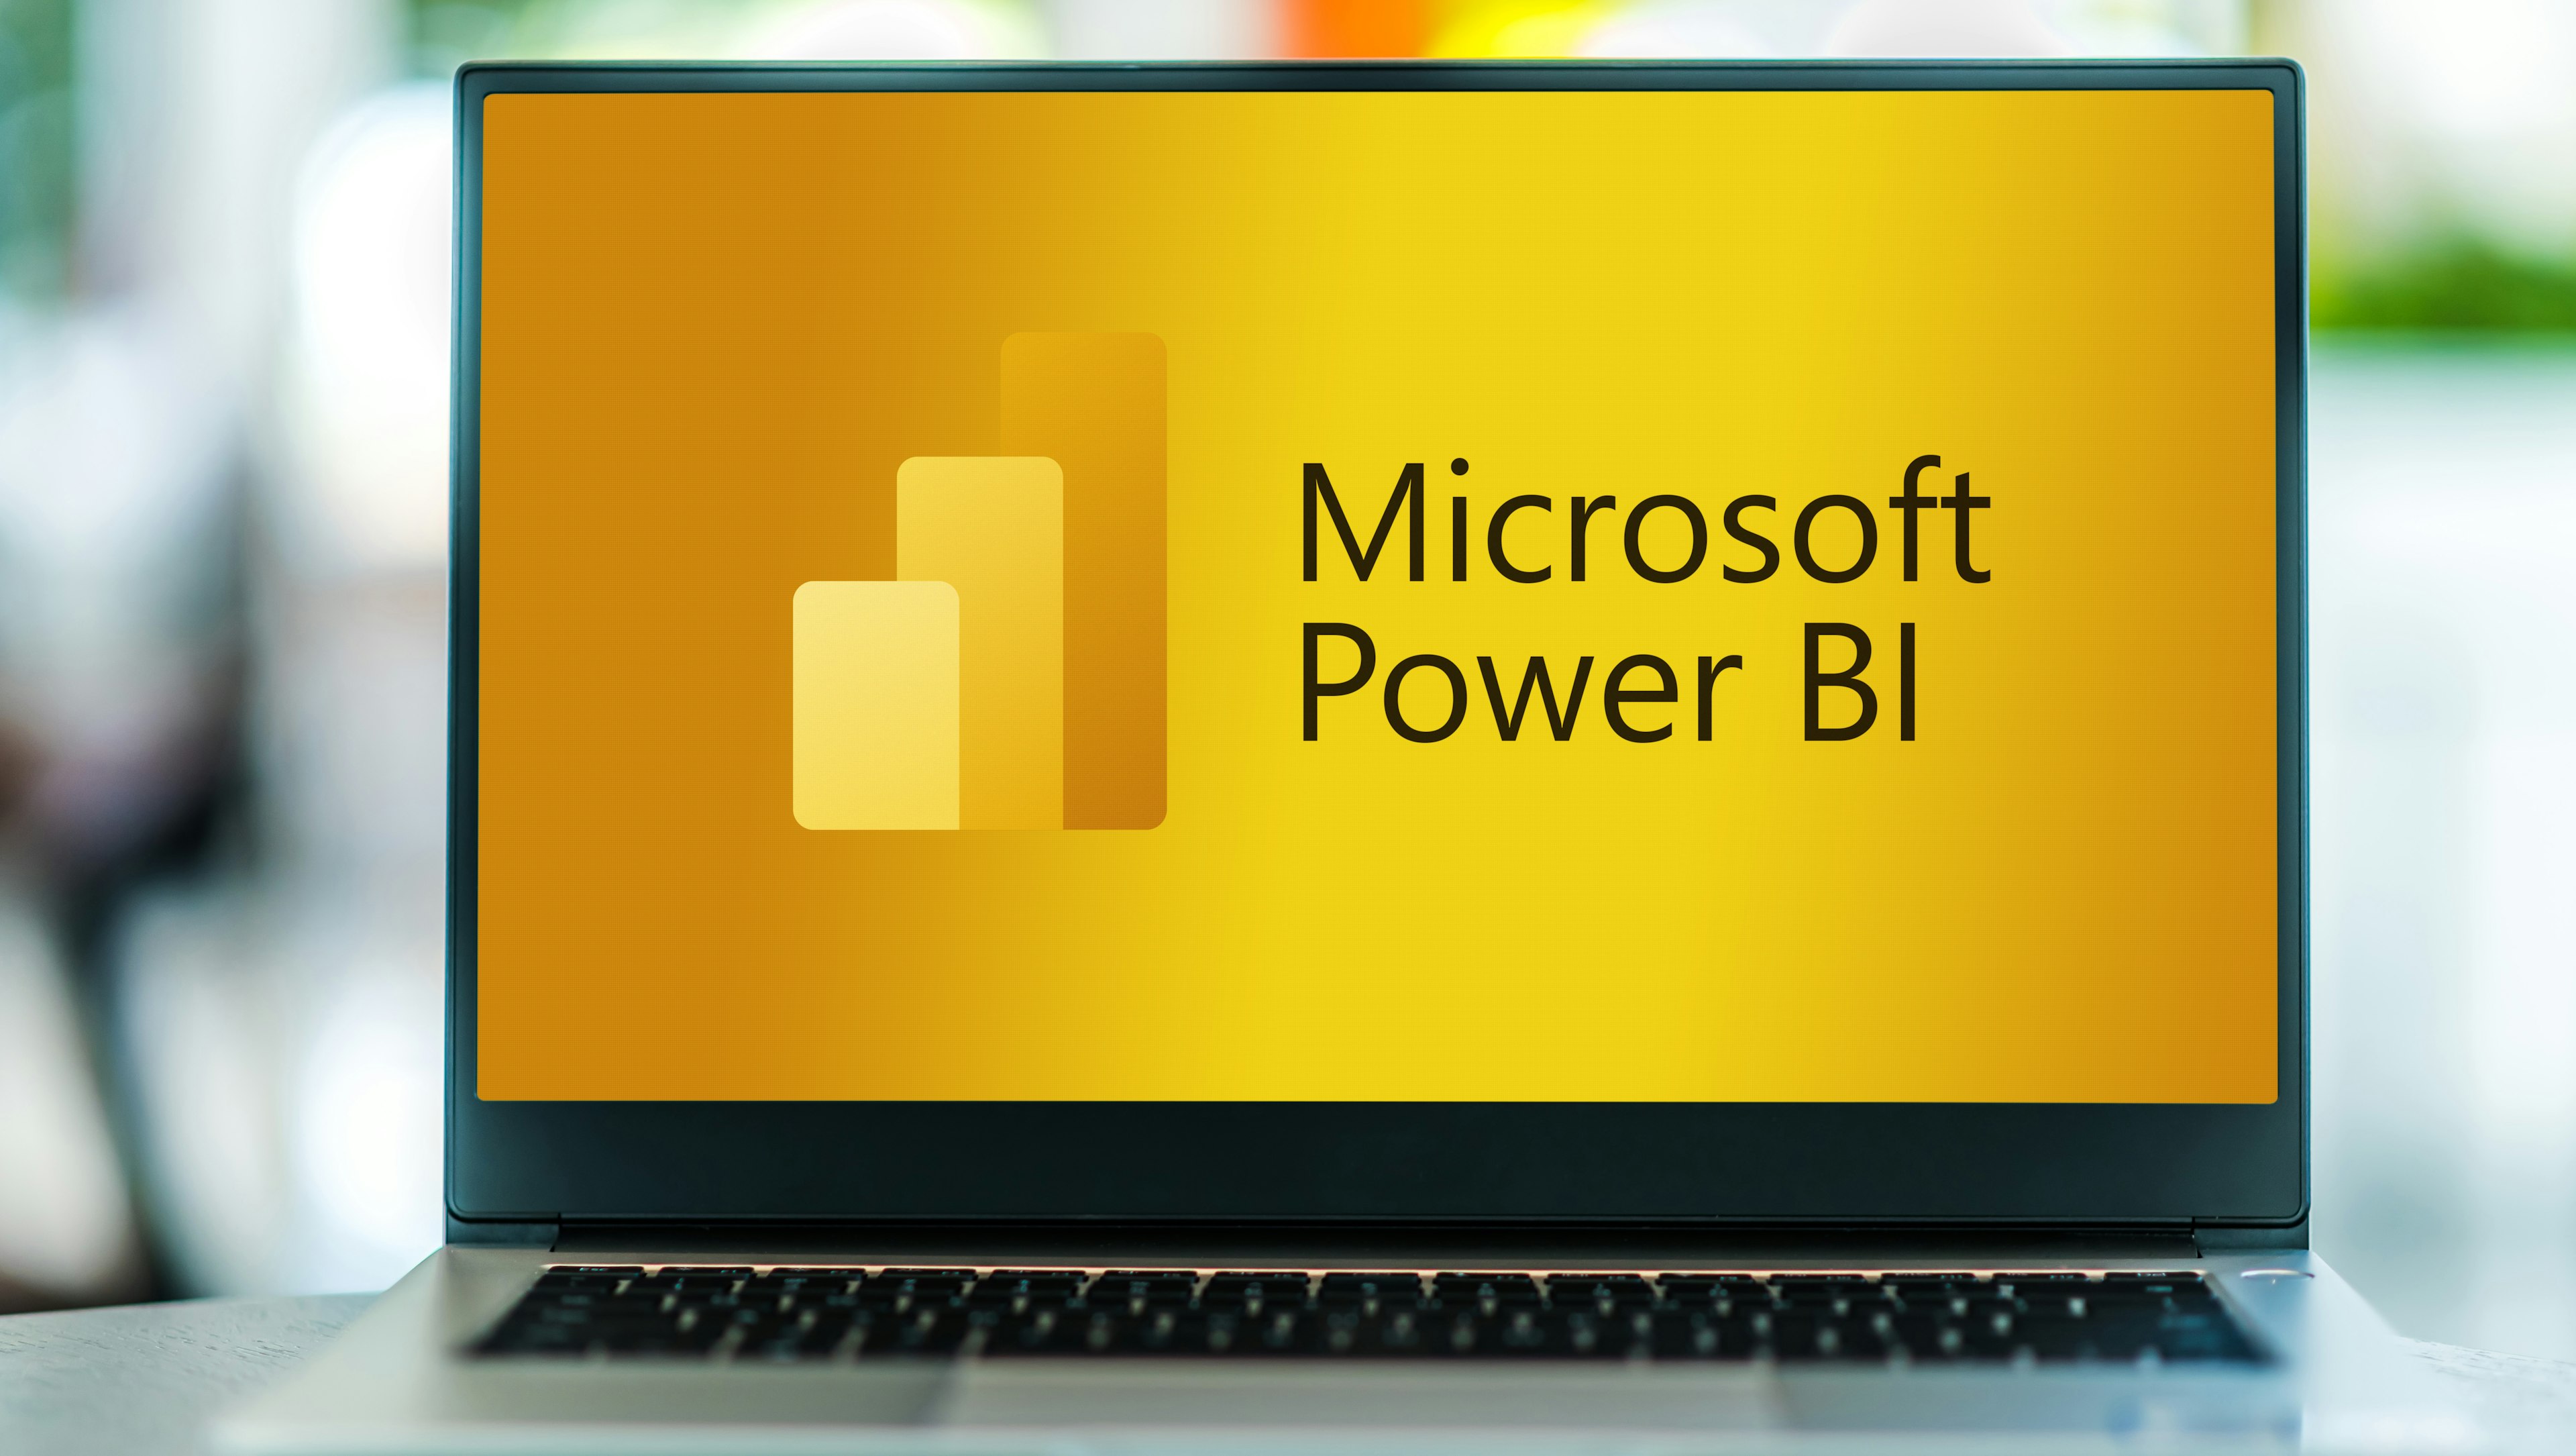 Data residency regulations may be difficult to comply with if your Power BI users are globally distributed. We describe options for a multi-region Power BI environment to address these challenges.